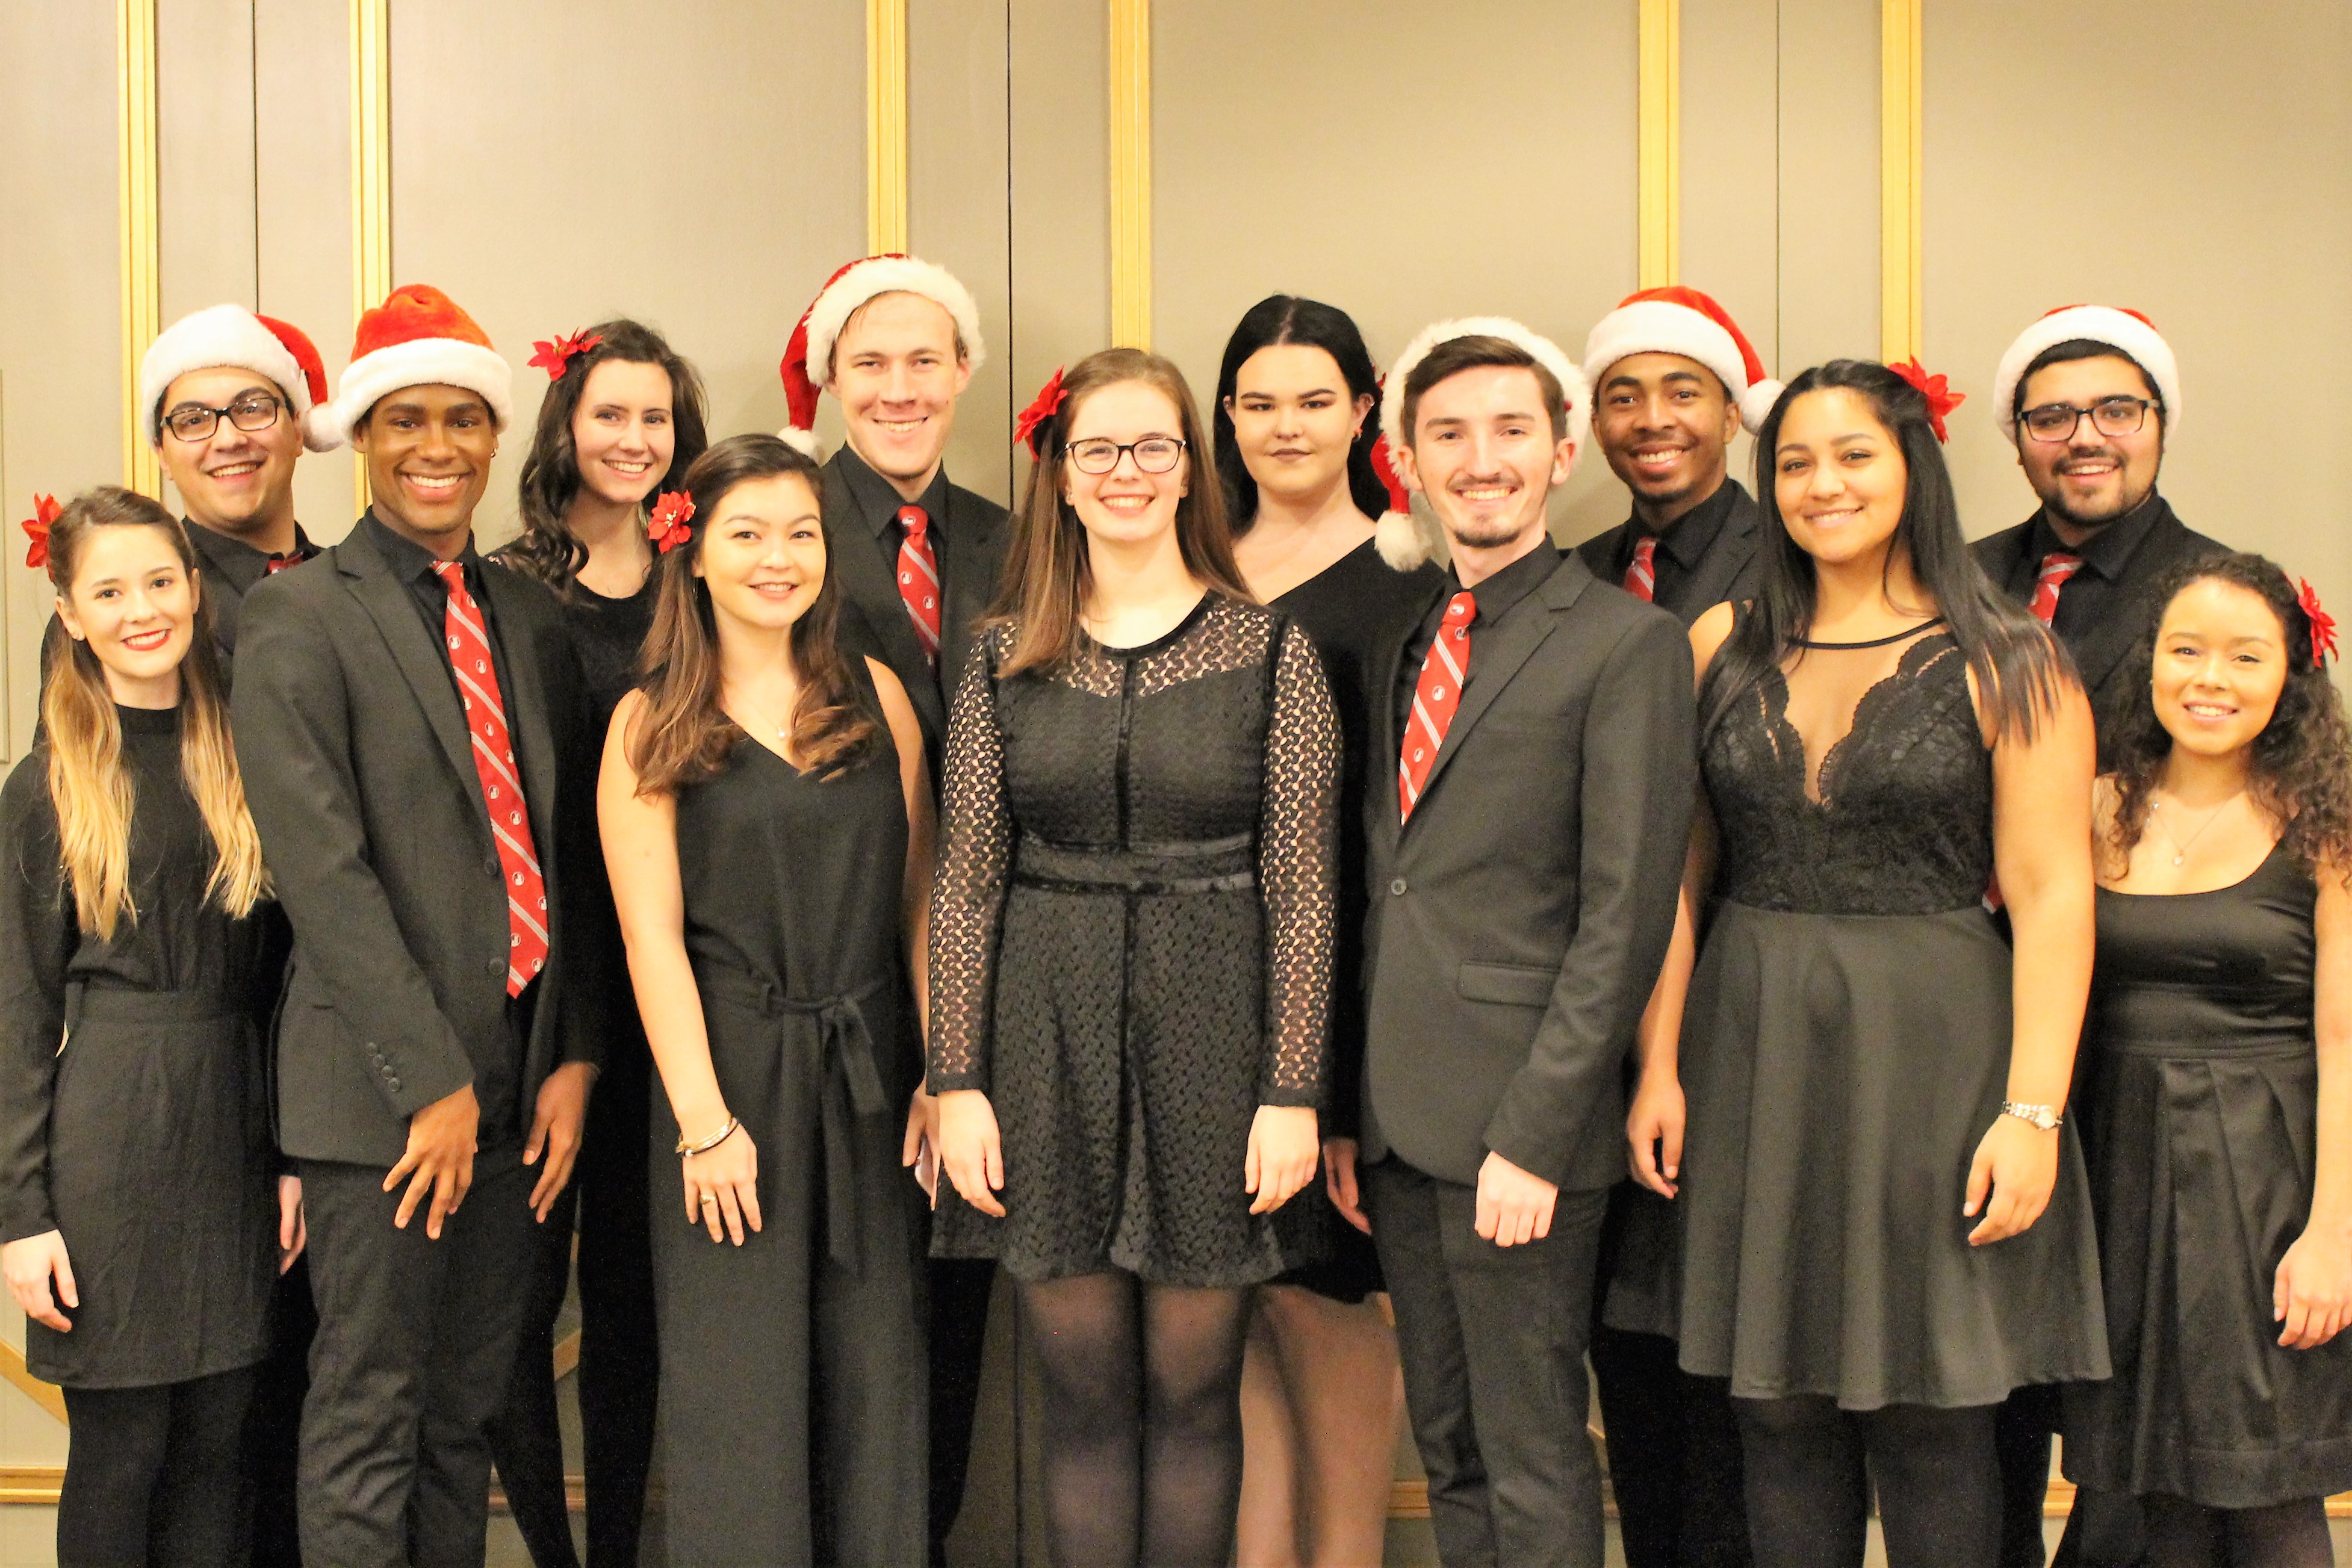 Manhattanville College’s elite pop vocal group, The Quintessentials, provided holiday entertainment for guests at HOW’s annual “Tree of Life” celebration.